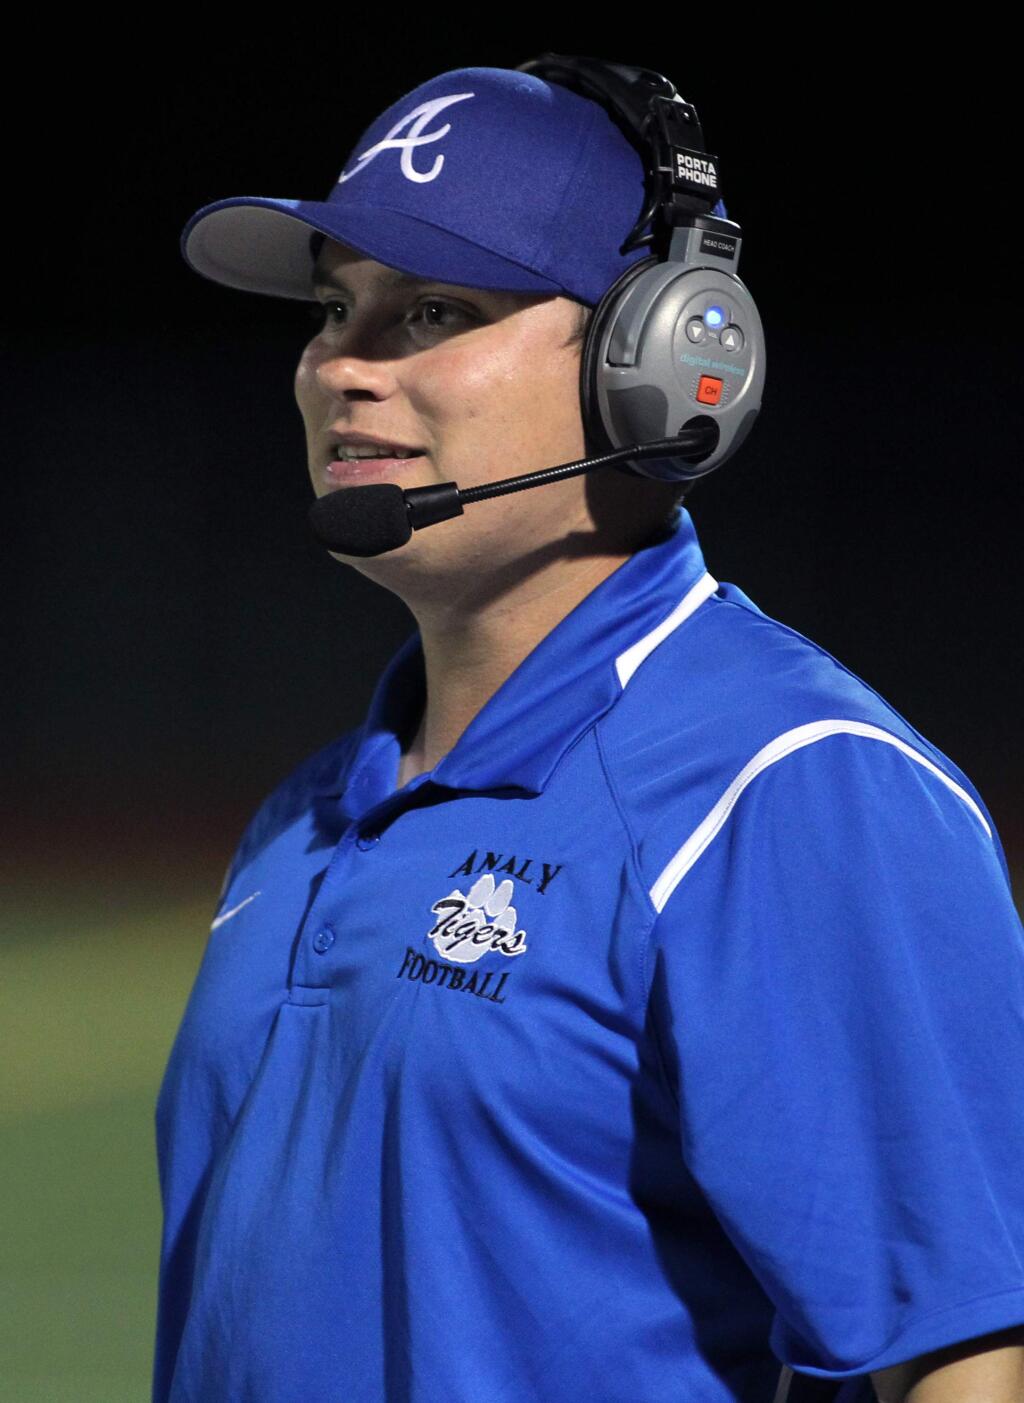 Analy High School's head coach James Foster smiles on the sidelines in the 1st half against Petaluma High School in Sebastopol, on Friday, September 22, 2017. (Photo by Darryl Bush / For The Press Democrat)